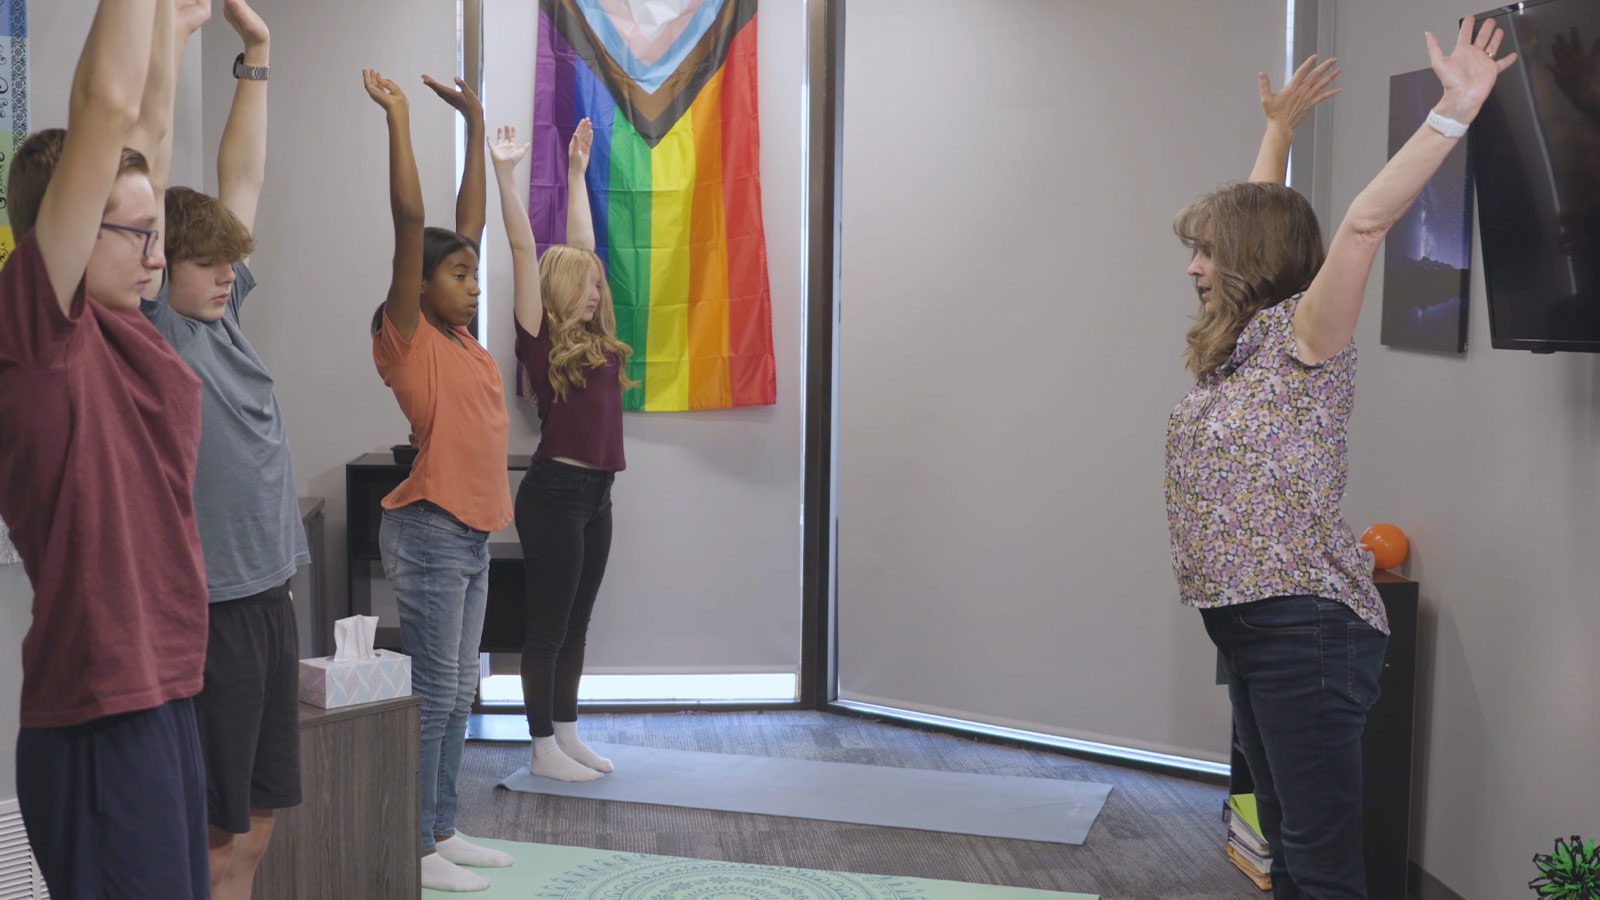 Participants stretching their arms up during a group physical wellness activity in a room with a pride flag.